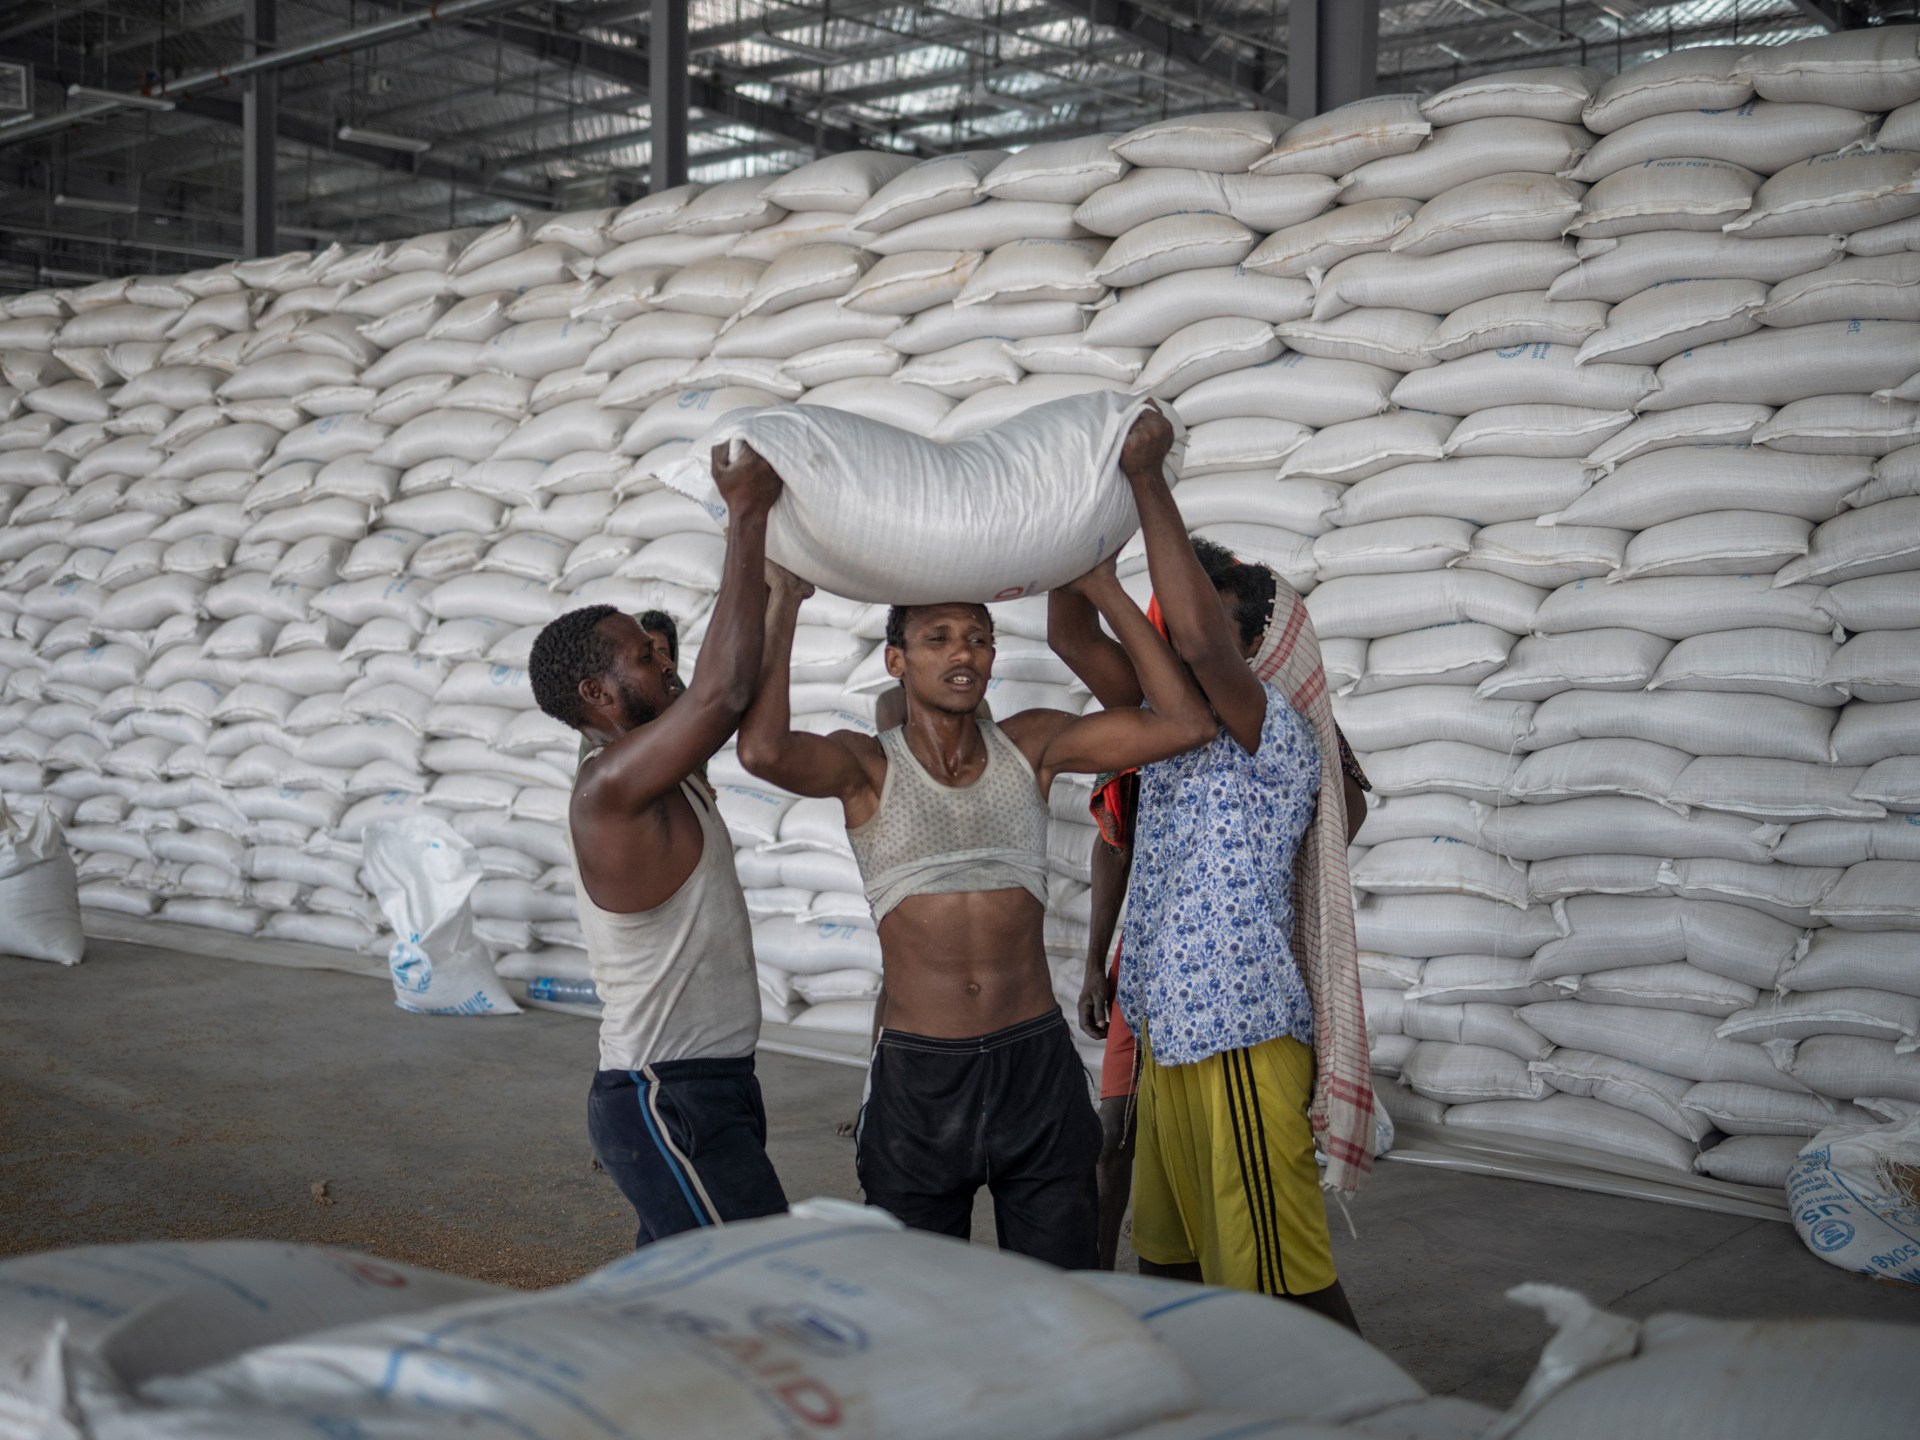 usaid-says-it-is-halting-all-food-aid-to-ethiopia-amid-diversions